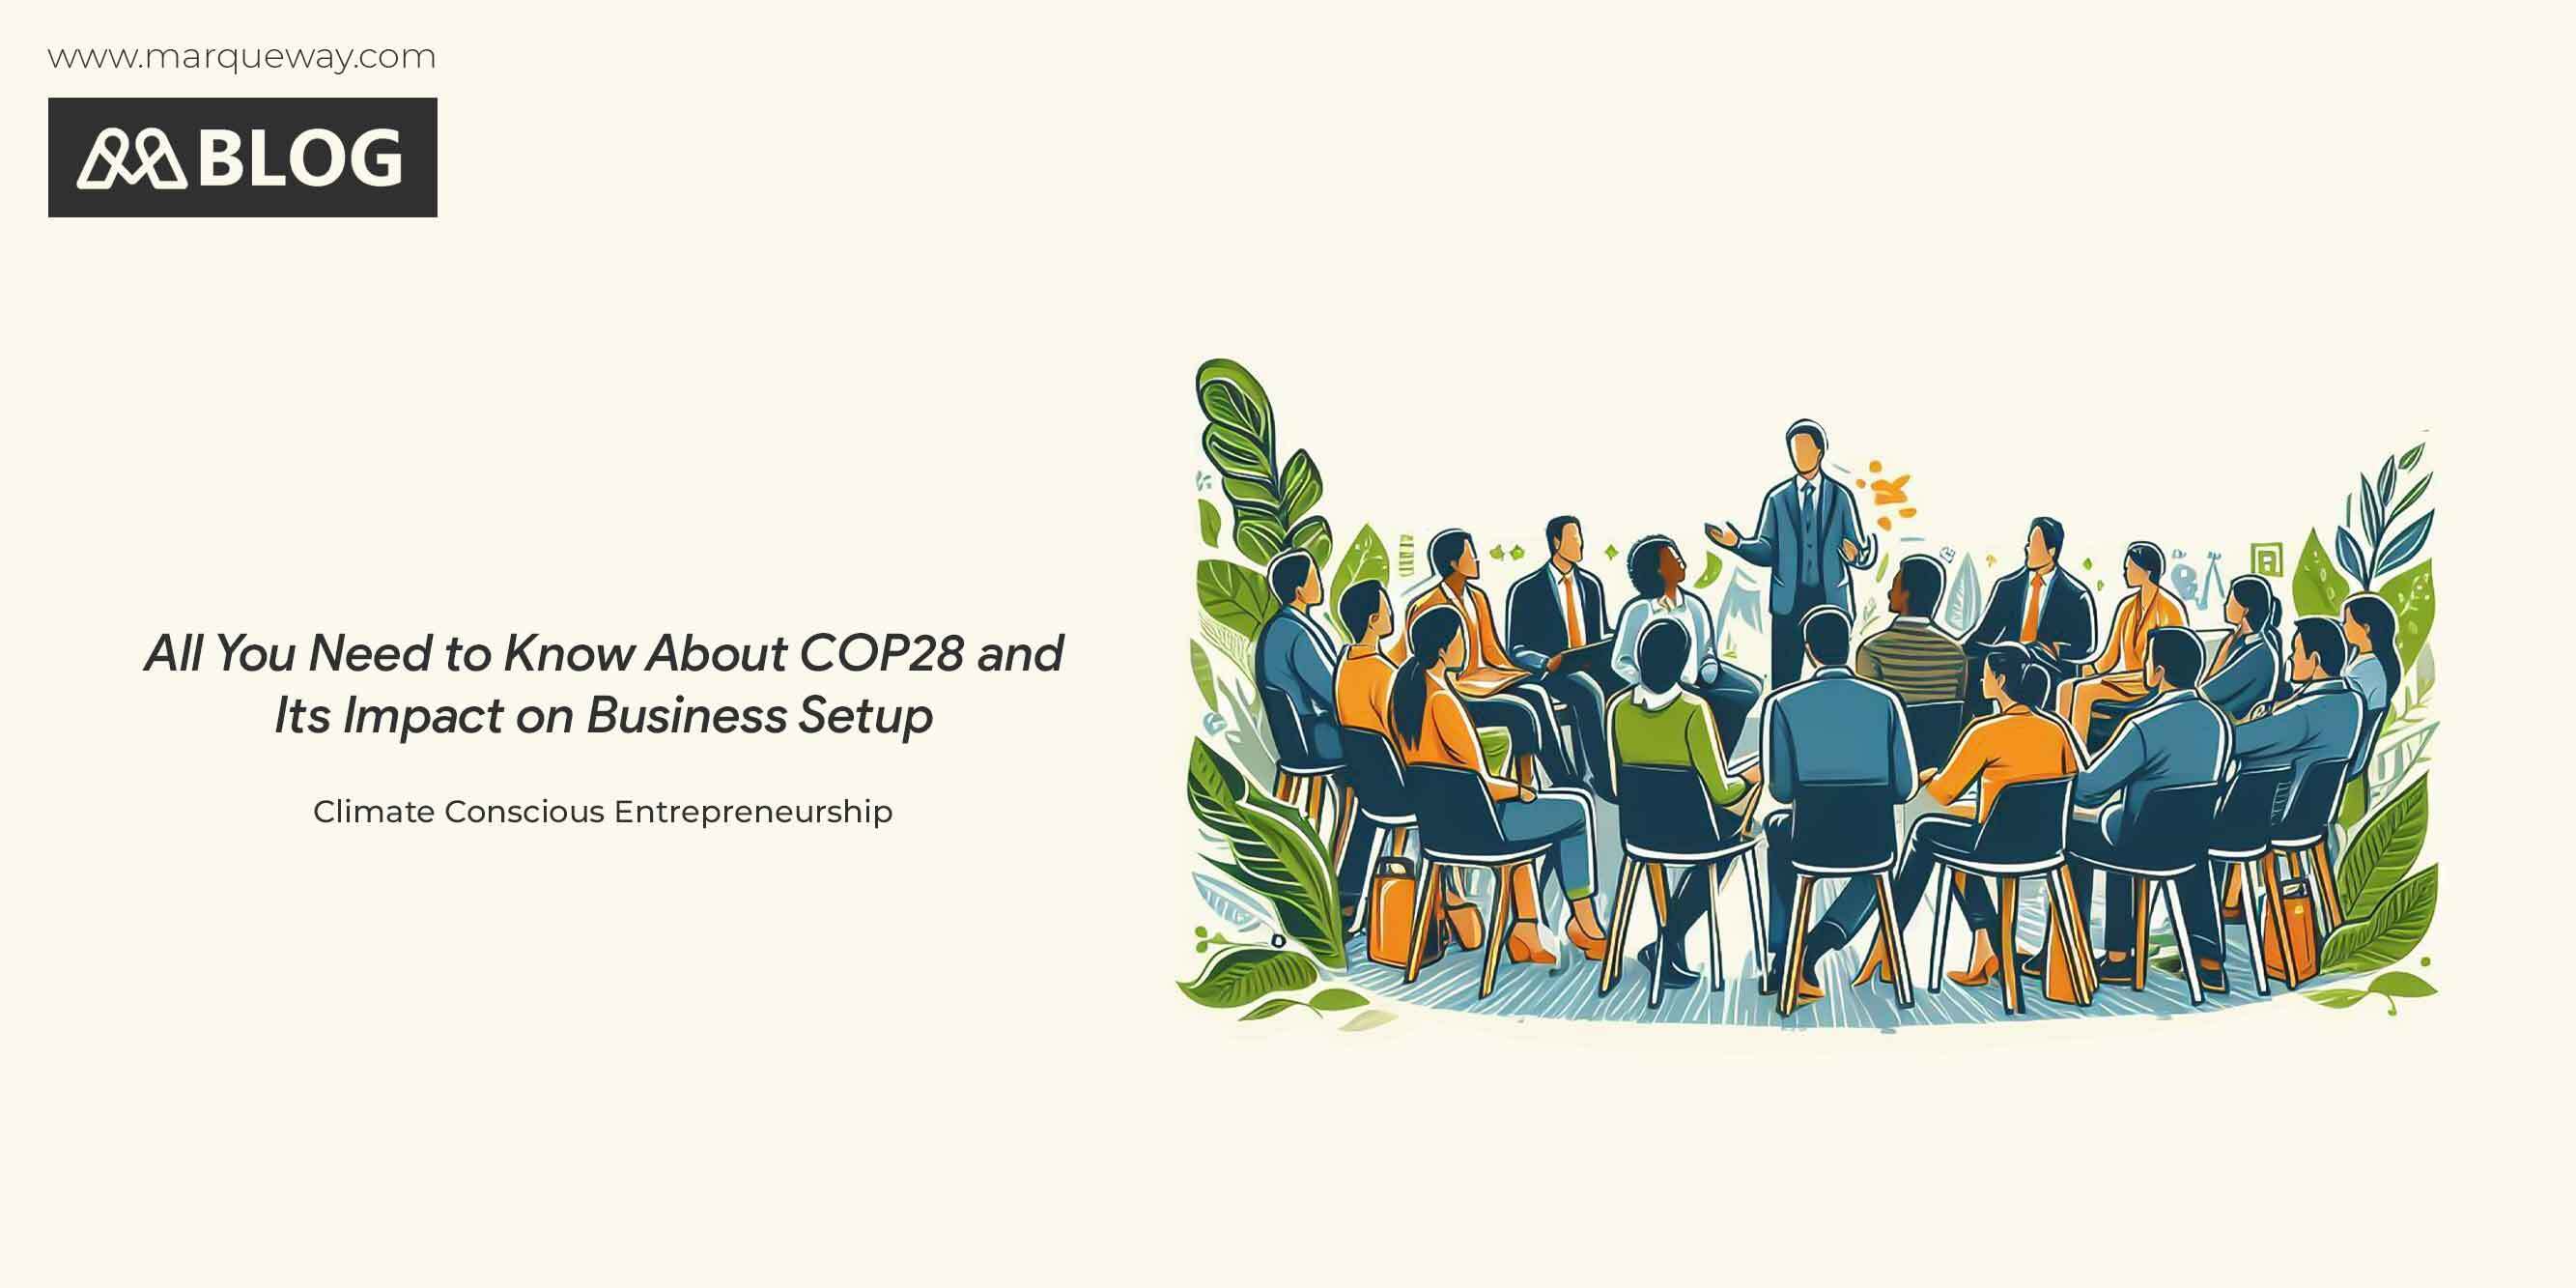 All You Need to Know About COP28 and Its Impact on Business Setup